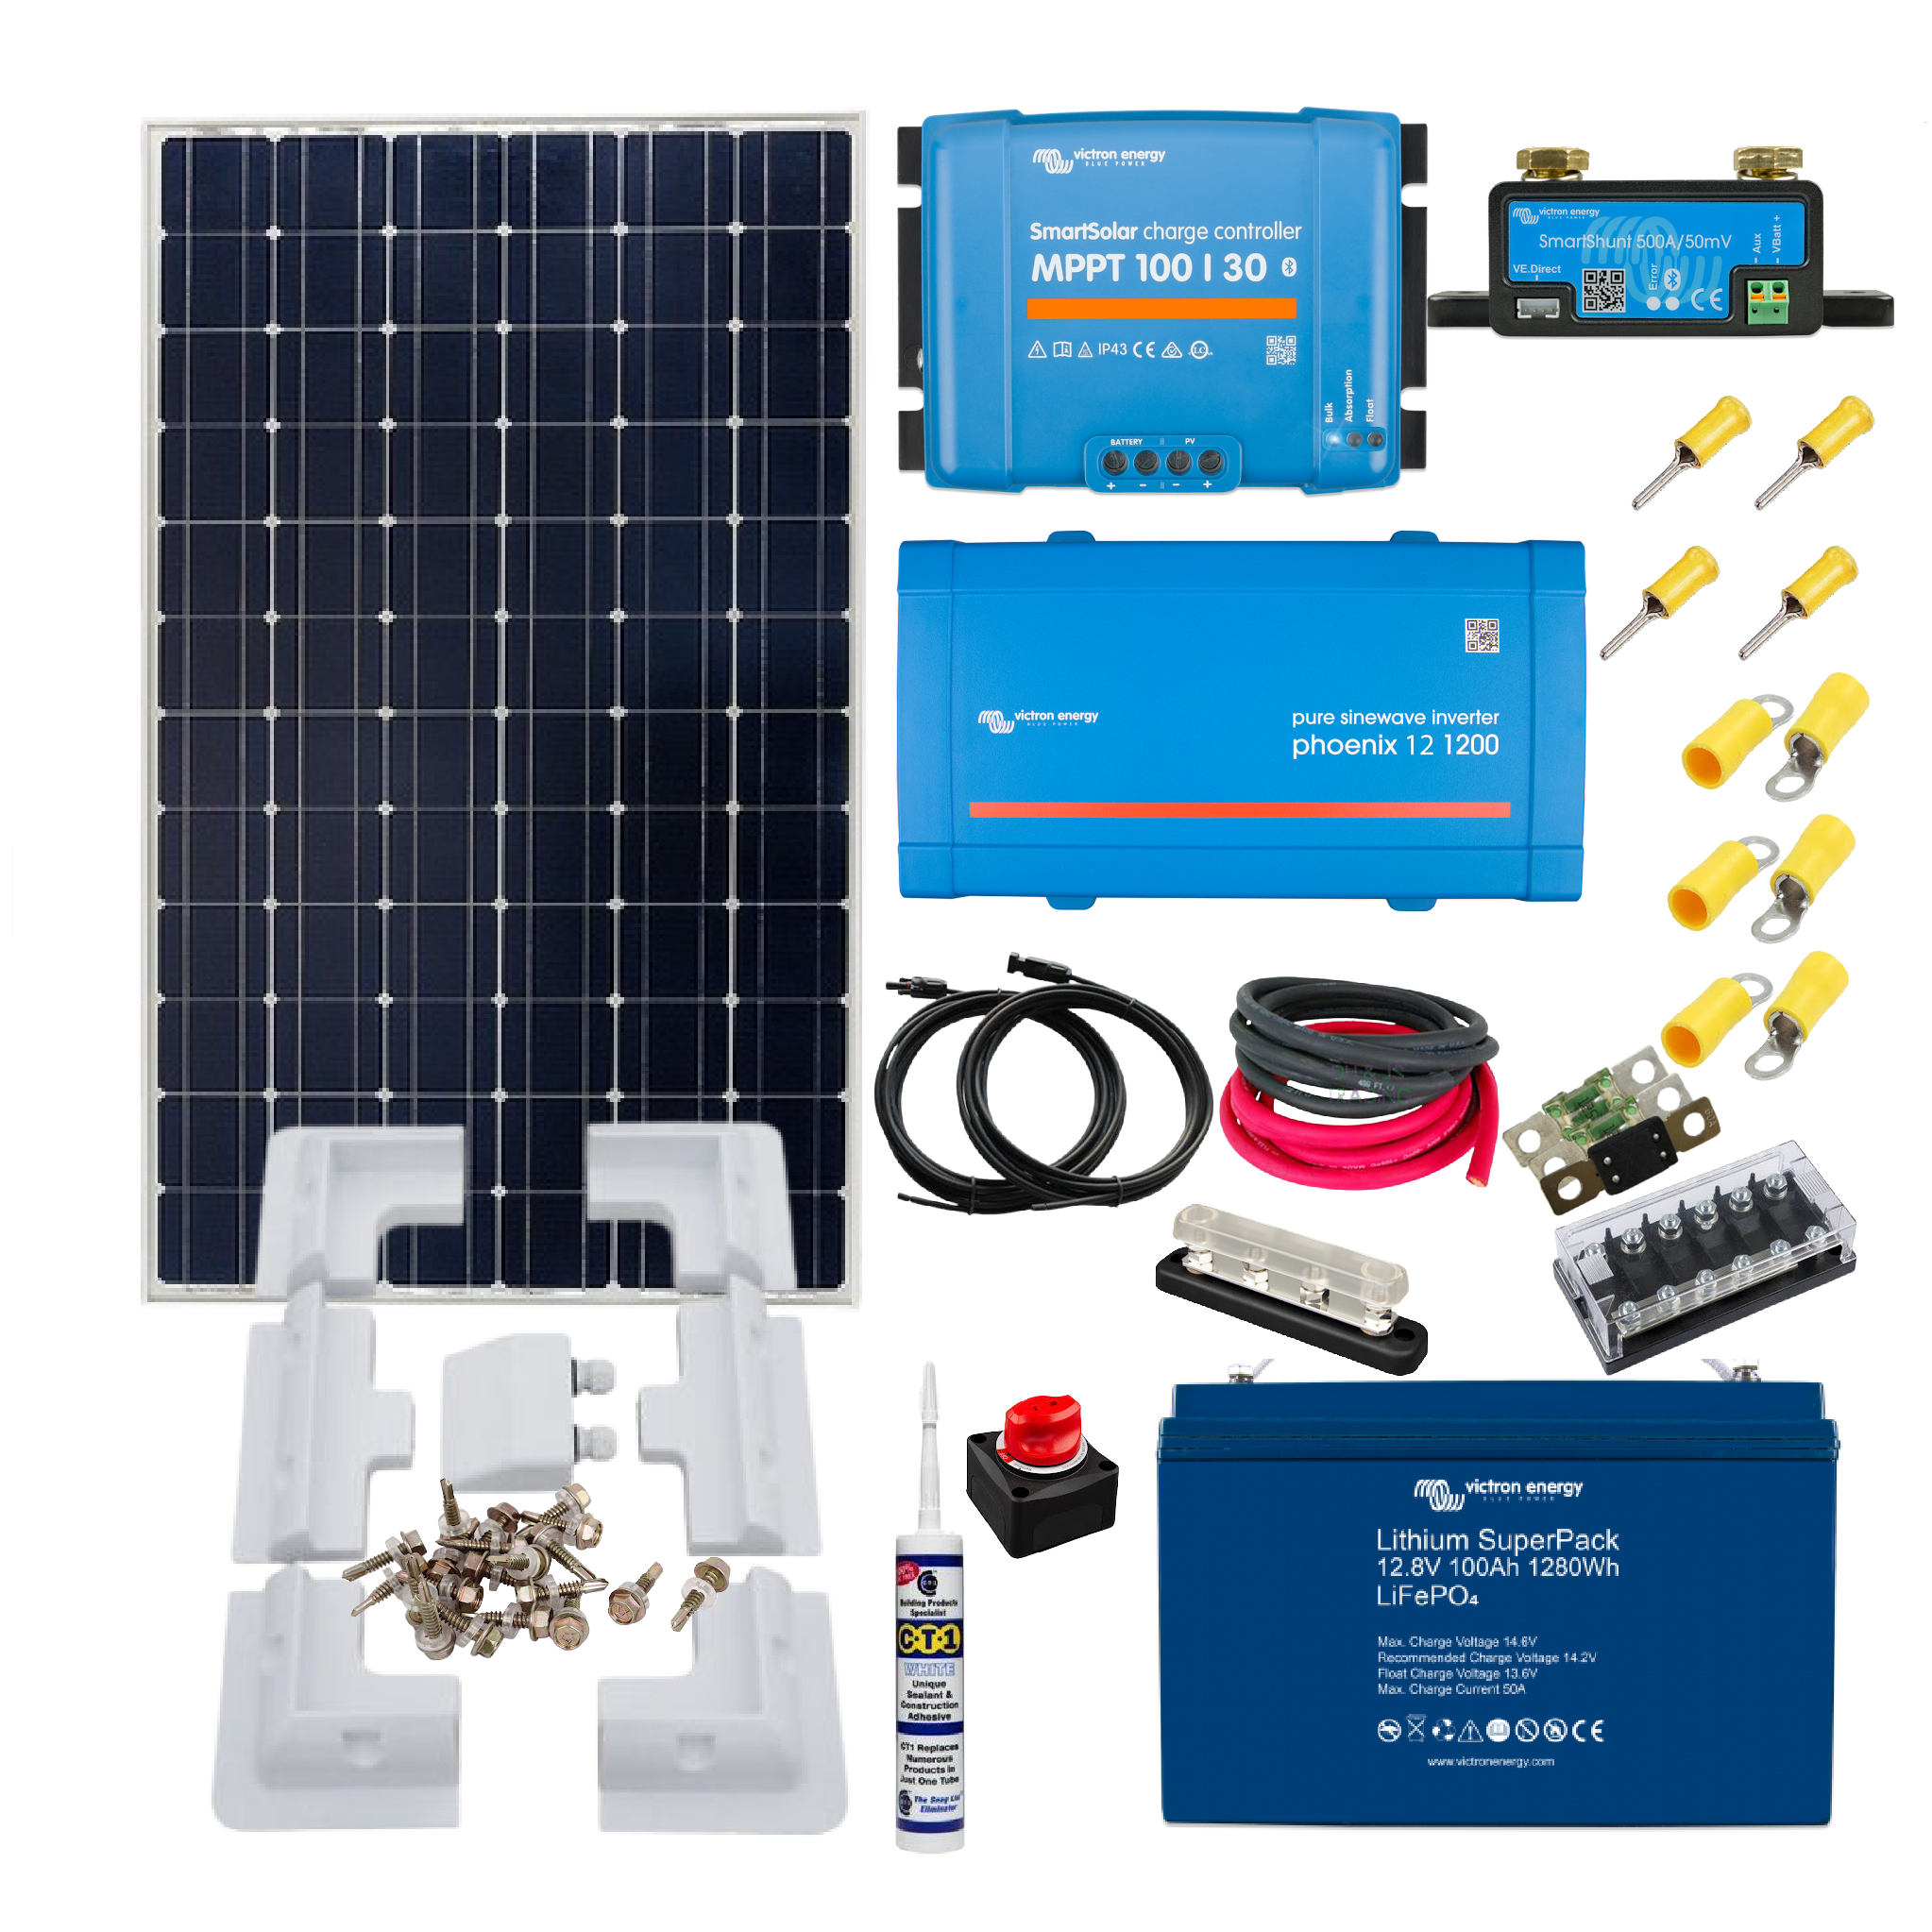 Kit solaire Véhicule Victron Energy 305W 12V full options